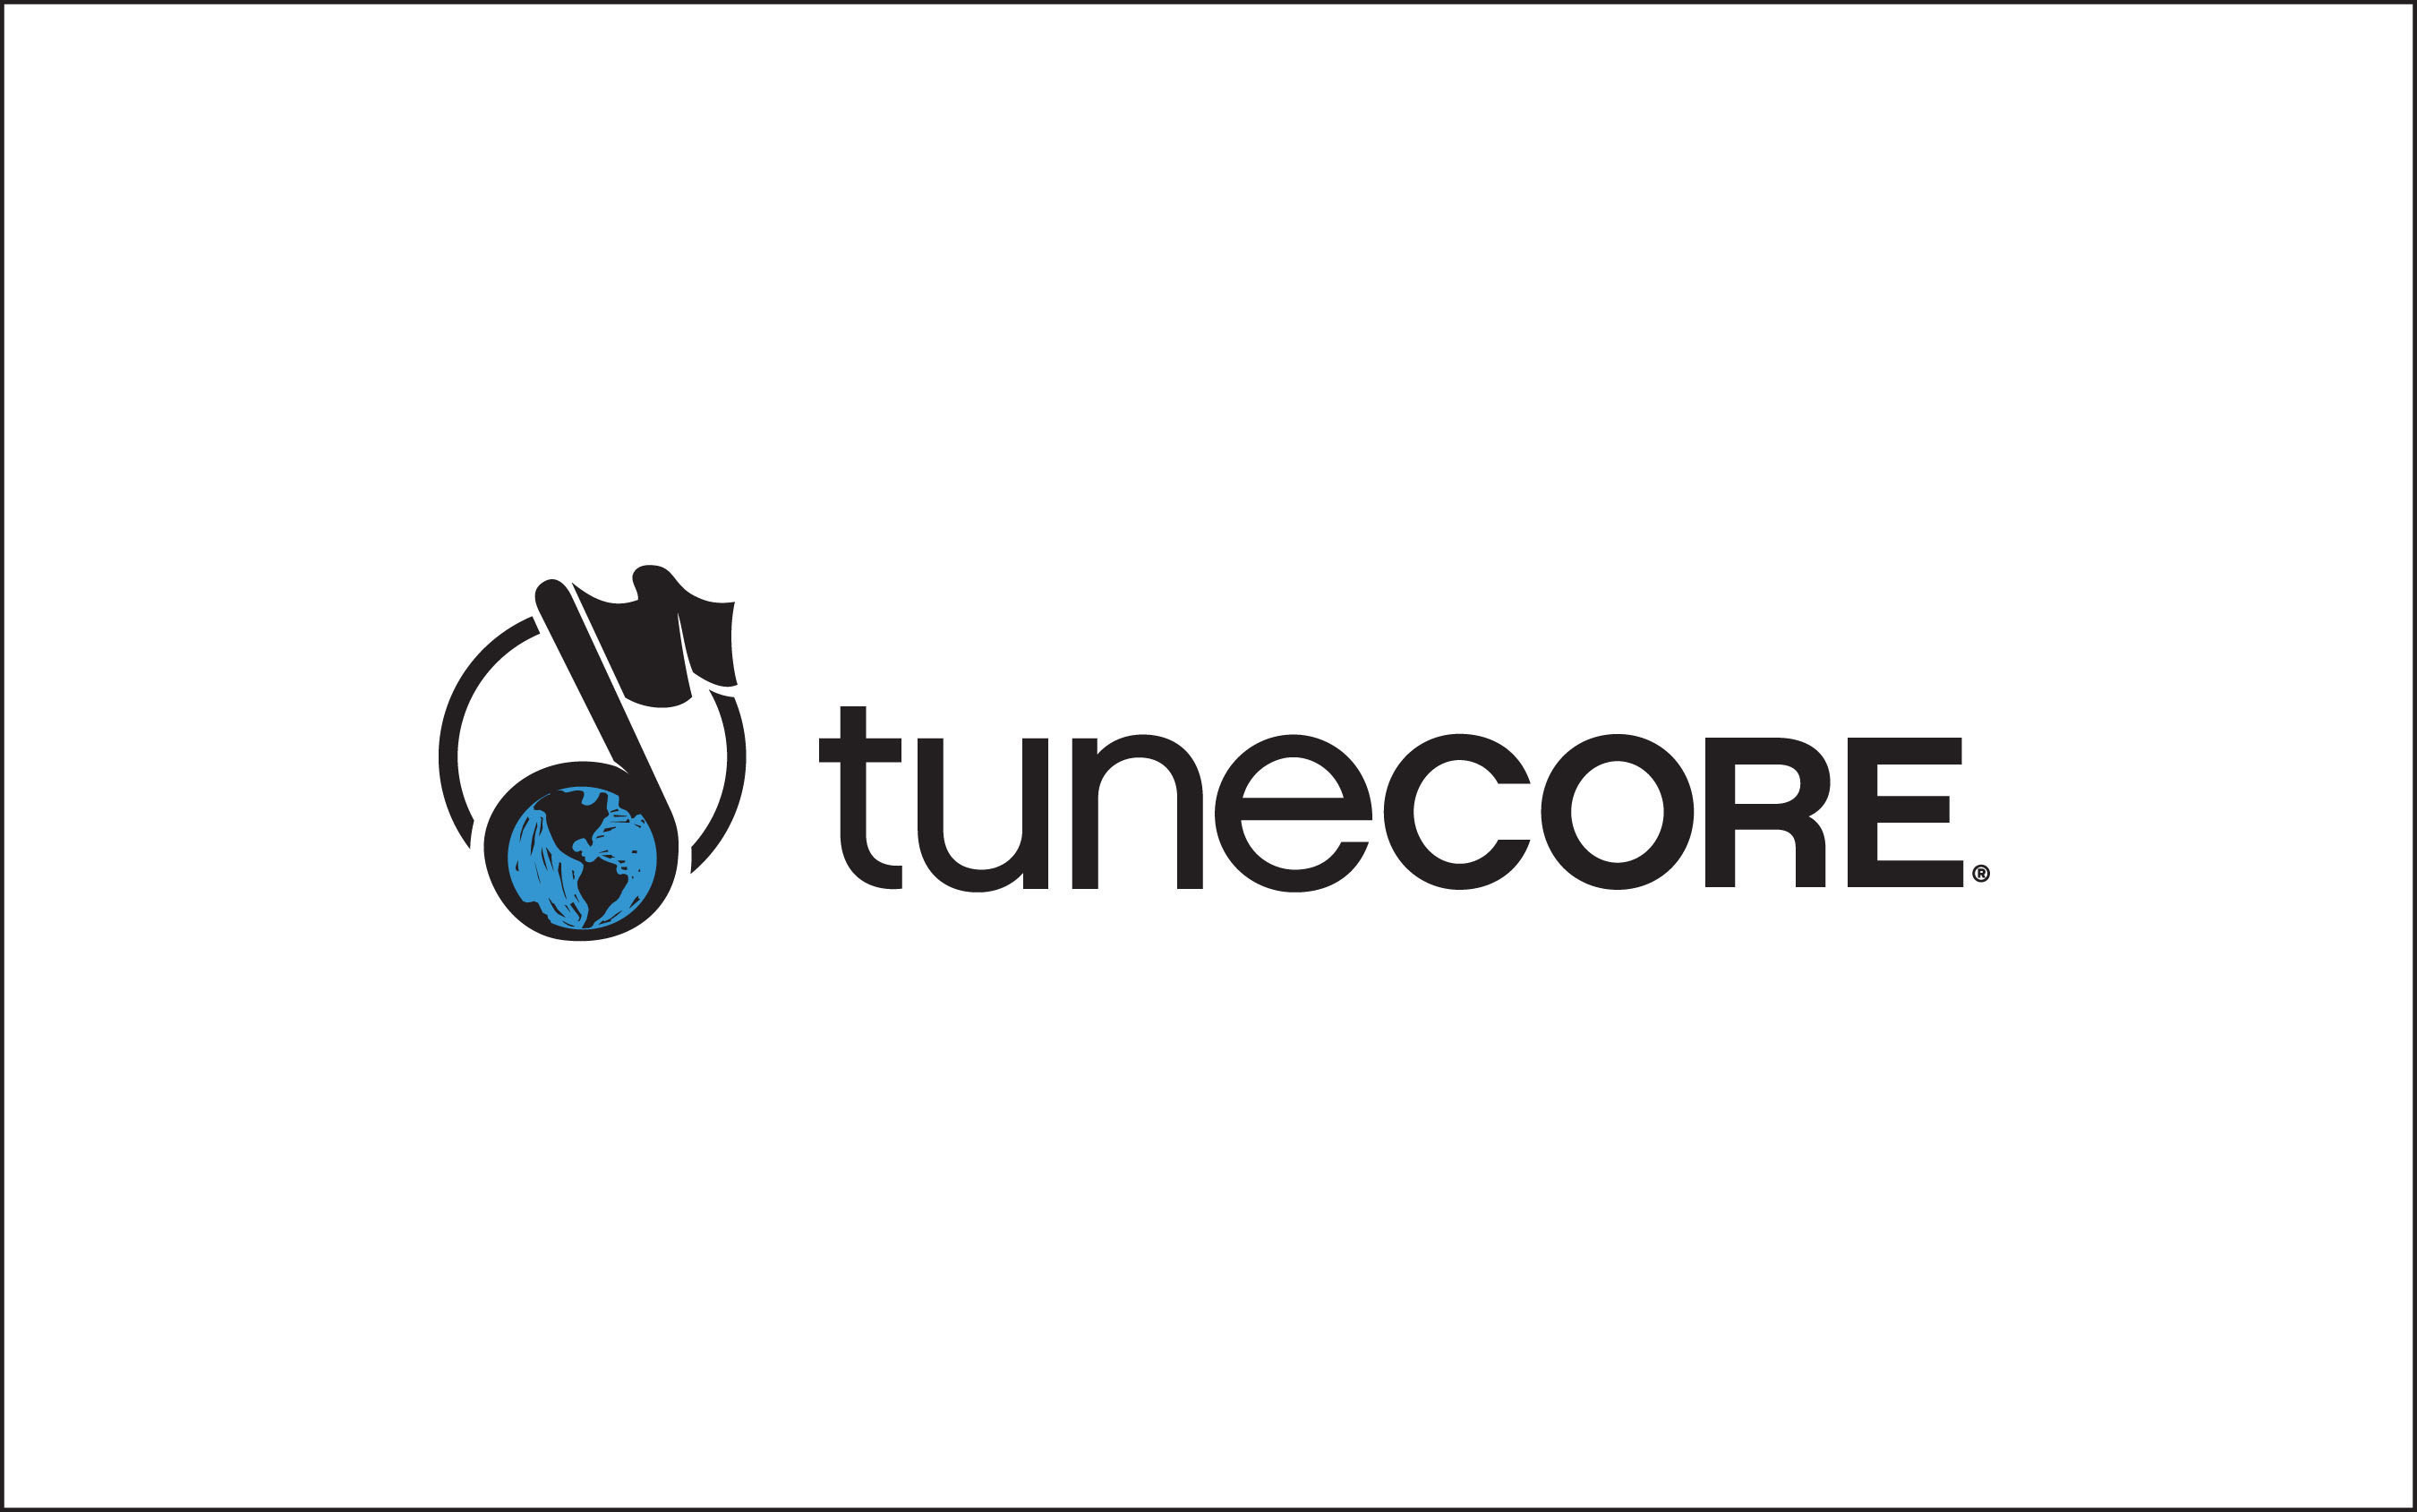 TuneCore brings more music to more people, while helping musicians and songwriters increase money-earning opportunities and take charge of their own careers. The company has one of the highest artist revenue-generating music catalogs in the world, earning TuneCore Artists $504 million on 12 billion streams and downloads since inception. TuneCore Music Distribution helps artists, labels and managers sell their music through iTunes, Amazon MP3, Spotify and other major download and streaming sites ...